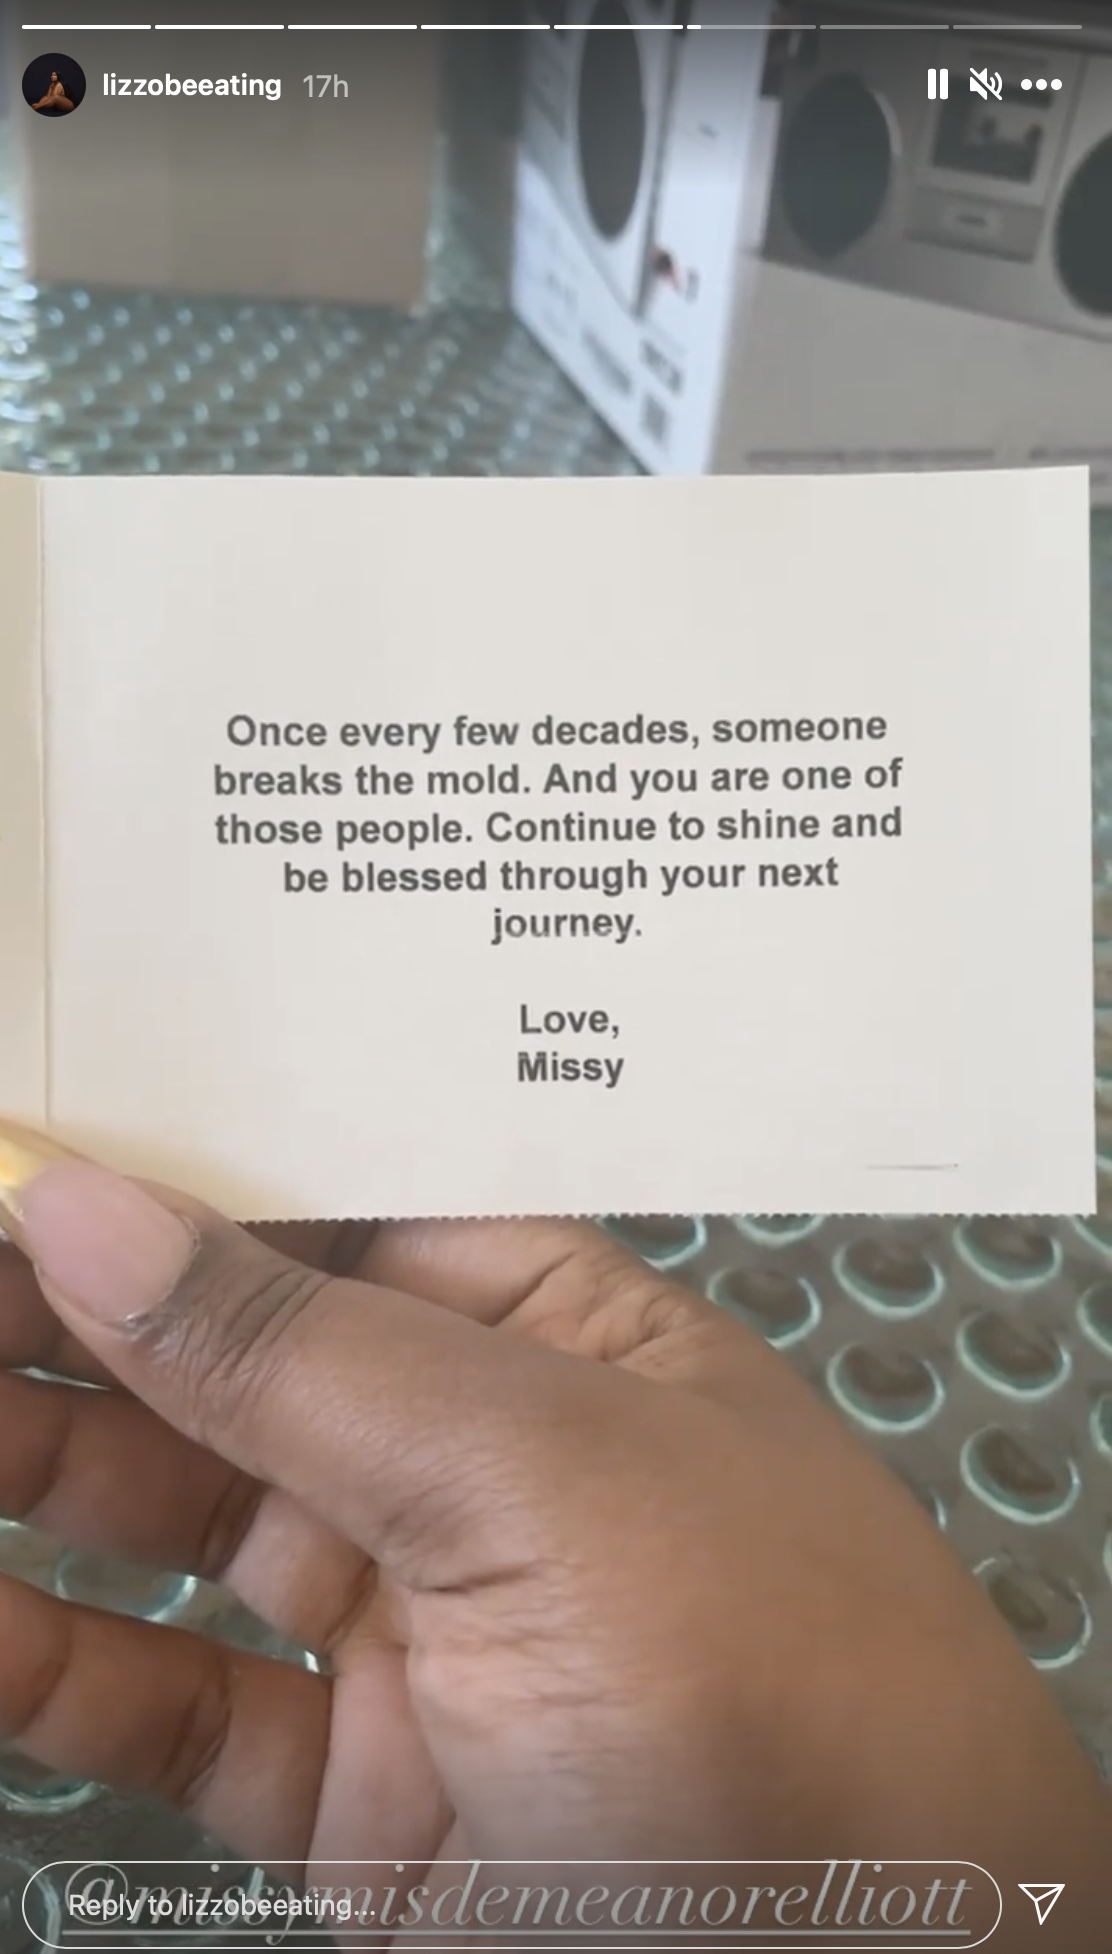 Missy Elliott&#x27;s note to Lizzo: &quot;Once every few decades, someone breaks the mold. And you are one of those people. Continue to shine and be blessed through your next journey. Love, Missy&quot;